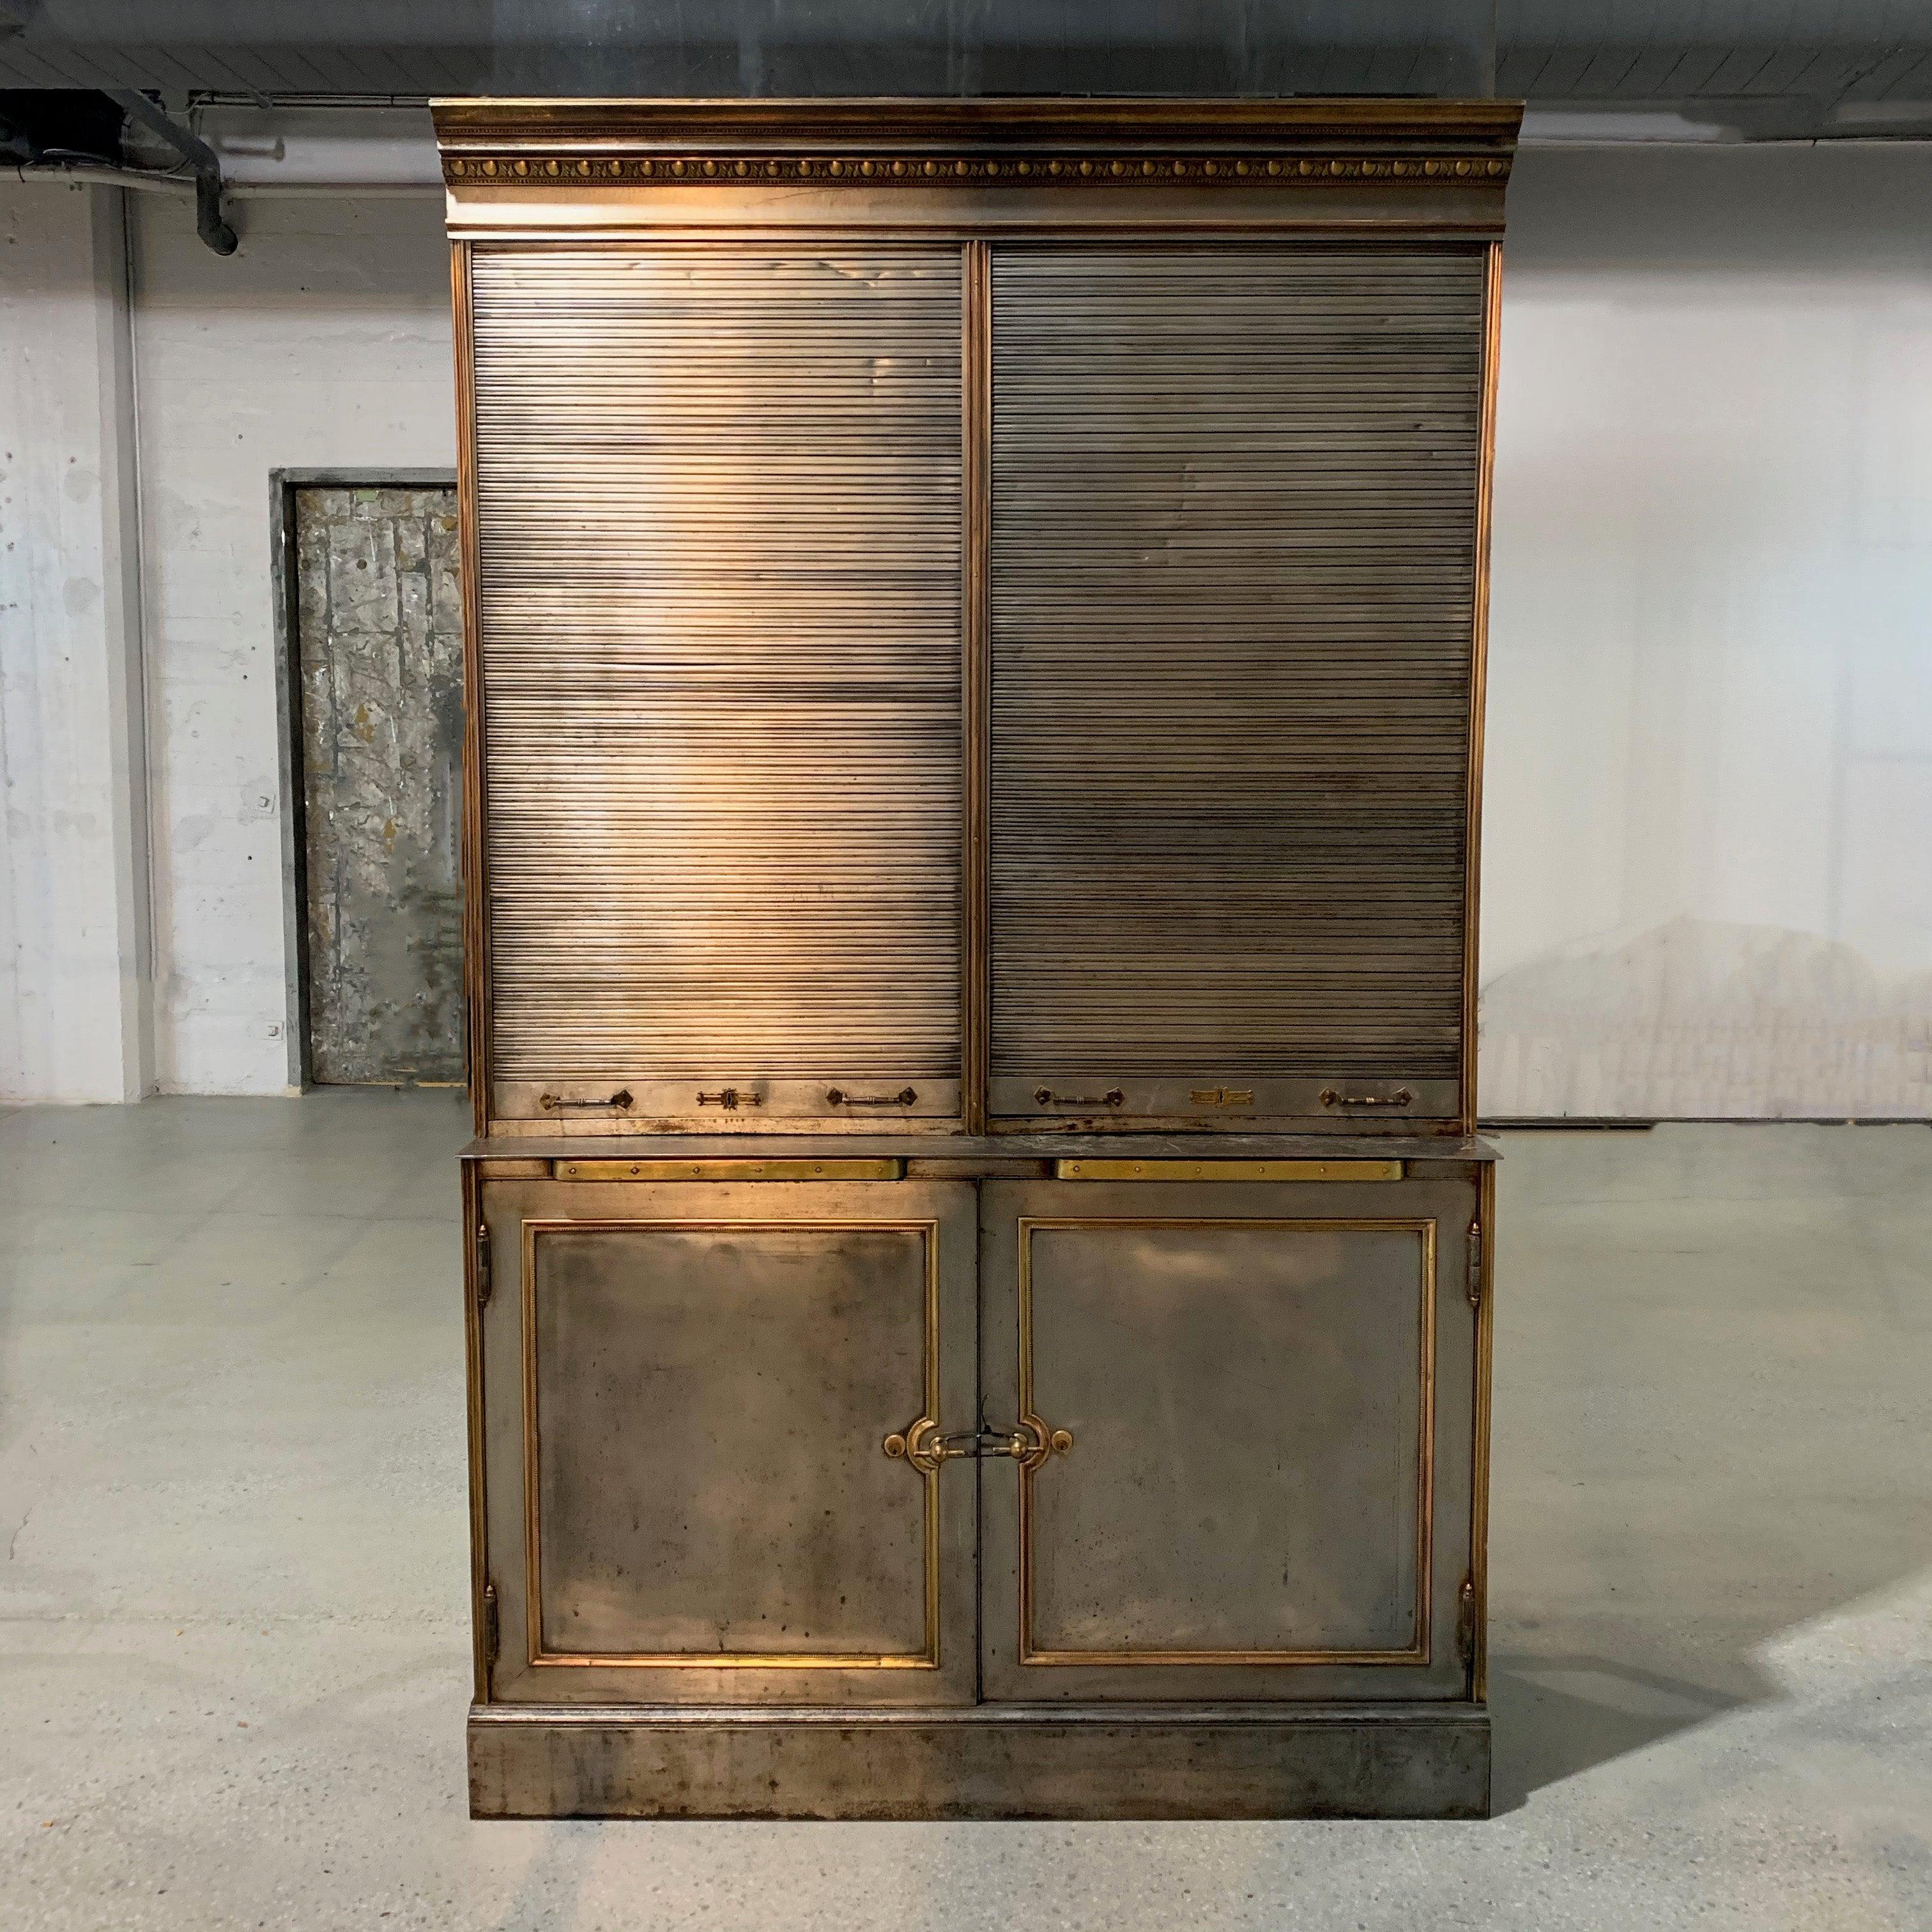 Antique, valuables safe display cabinet is a piece of New York history as it is reputedly from R.H. Macy & Co., Herald Square, circa 1902. The two-piece, steel cabinet features brass filigree details throughout. The 36 inch, counter height bottom